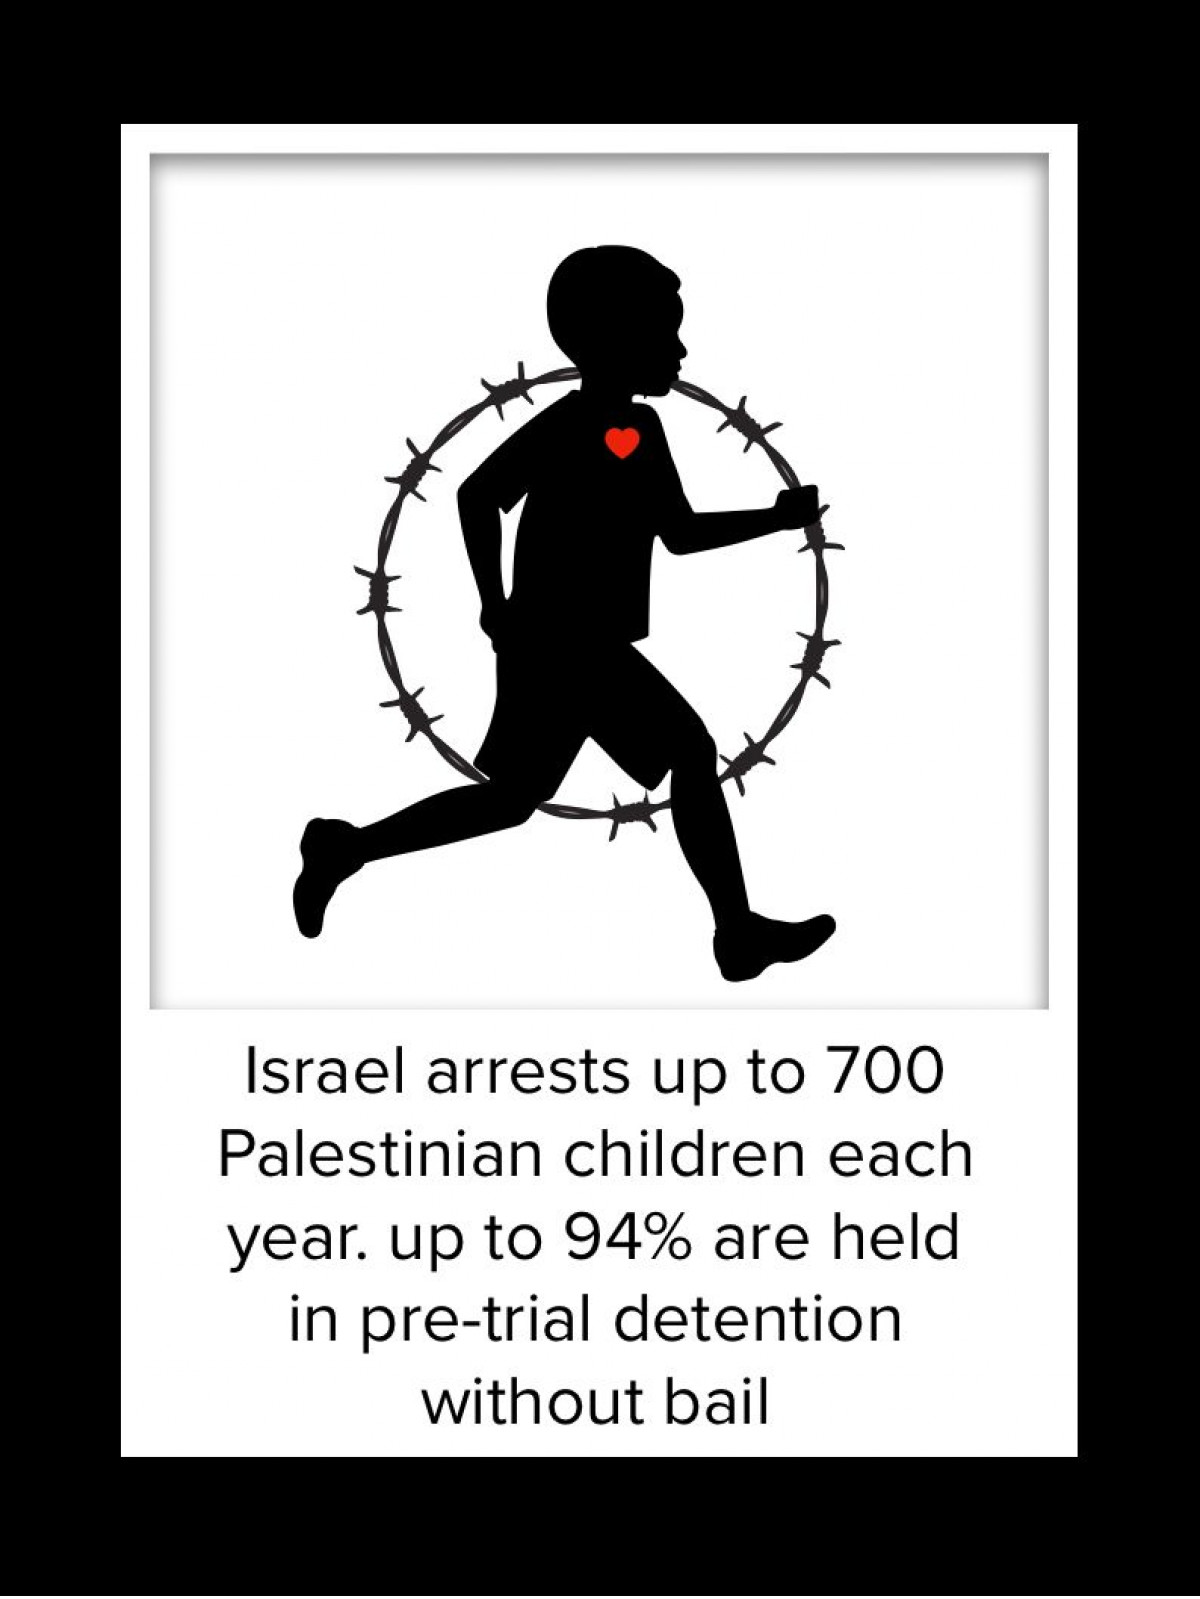 israel arrests up to 700 palestinian children each year  up to 94% are held in pre-trial detention without bail